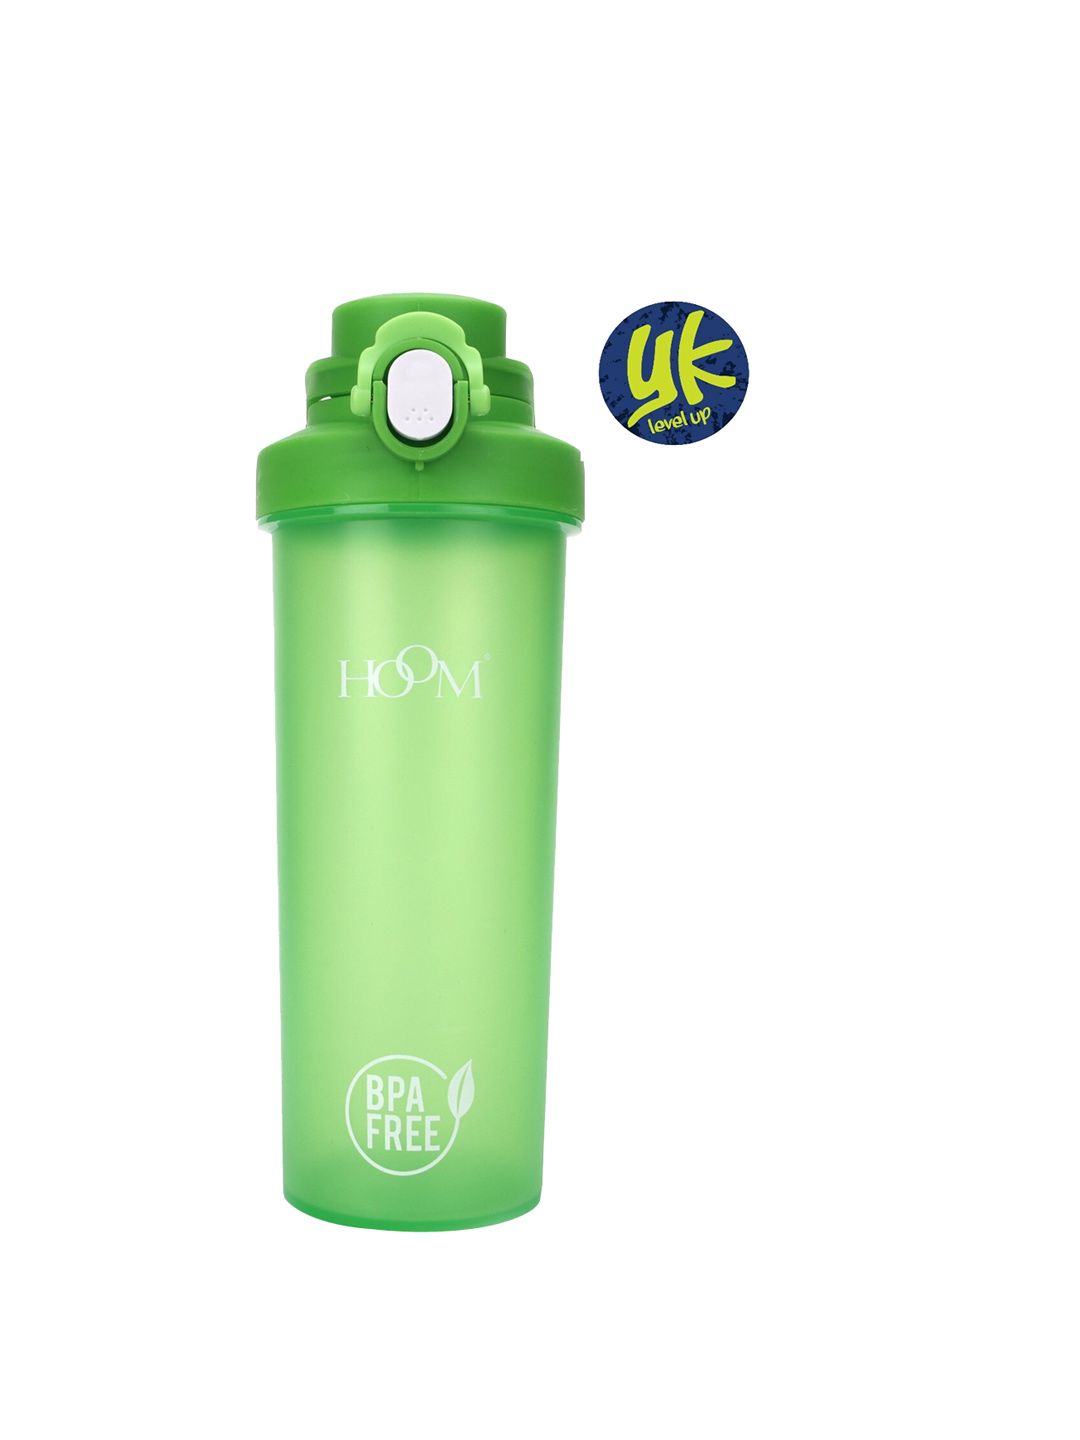 YK Green Solid BPA Free Gym Shaker Bottle with Push Button - 750 ml Price in India